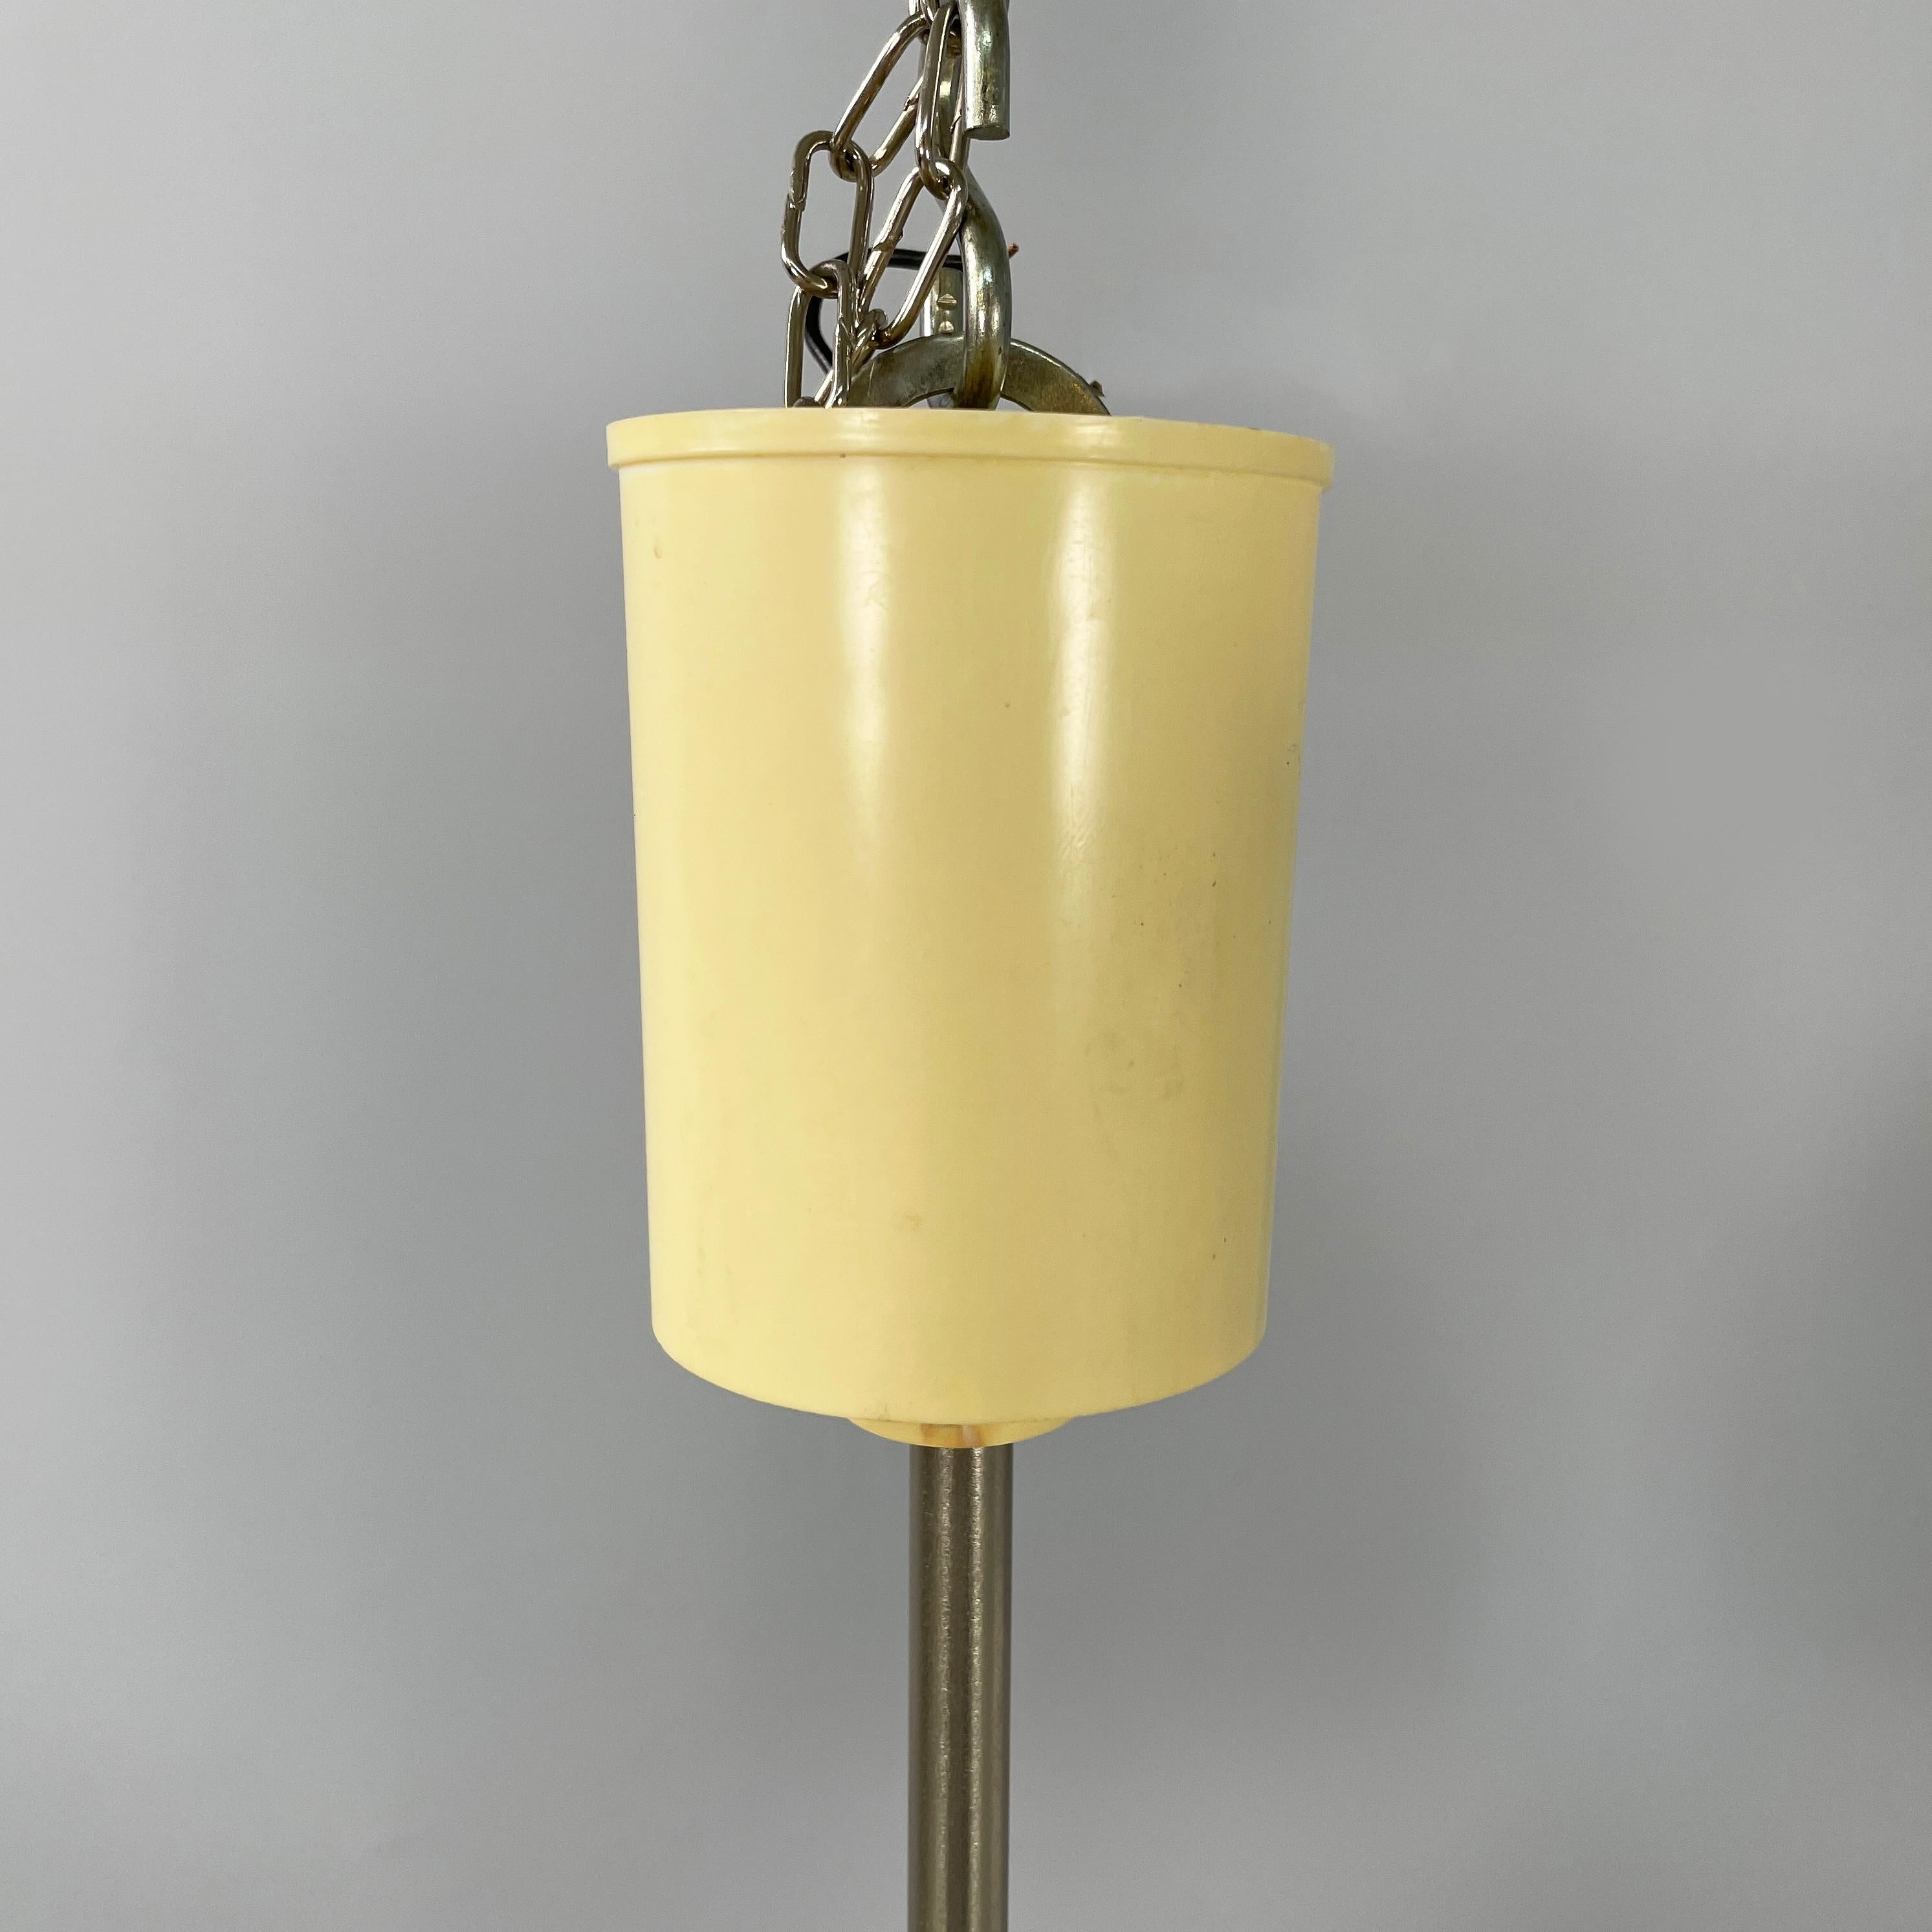 German Bauhaus Chandelier in opaline glass, white plastic and metal, 1920s For Sale 8